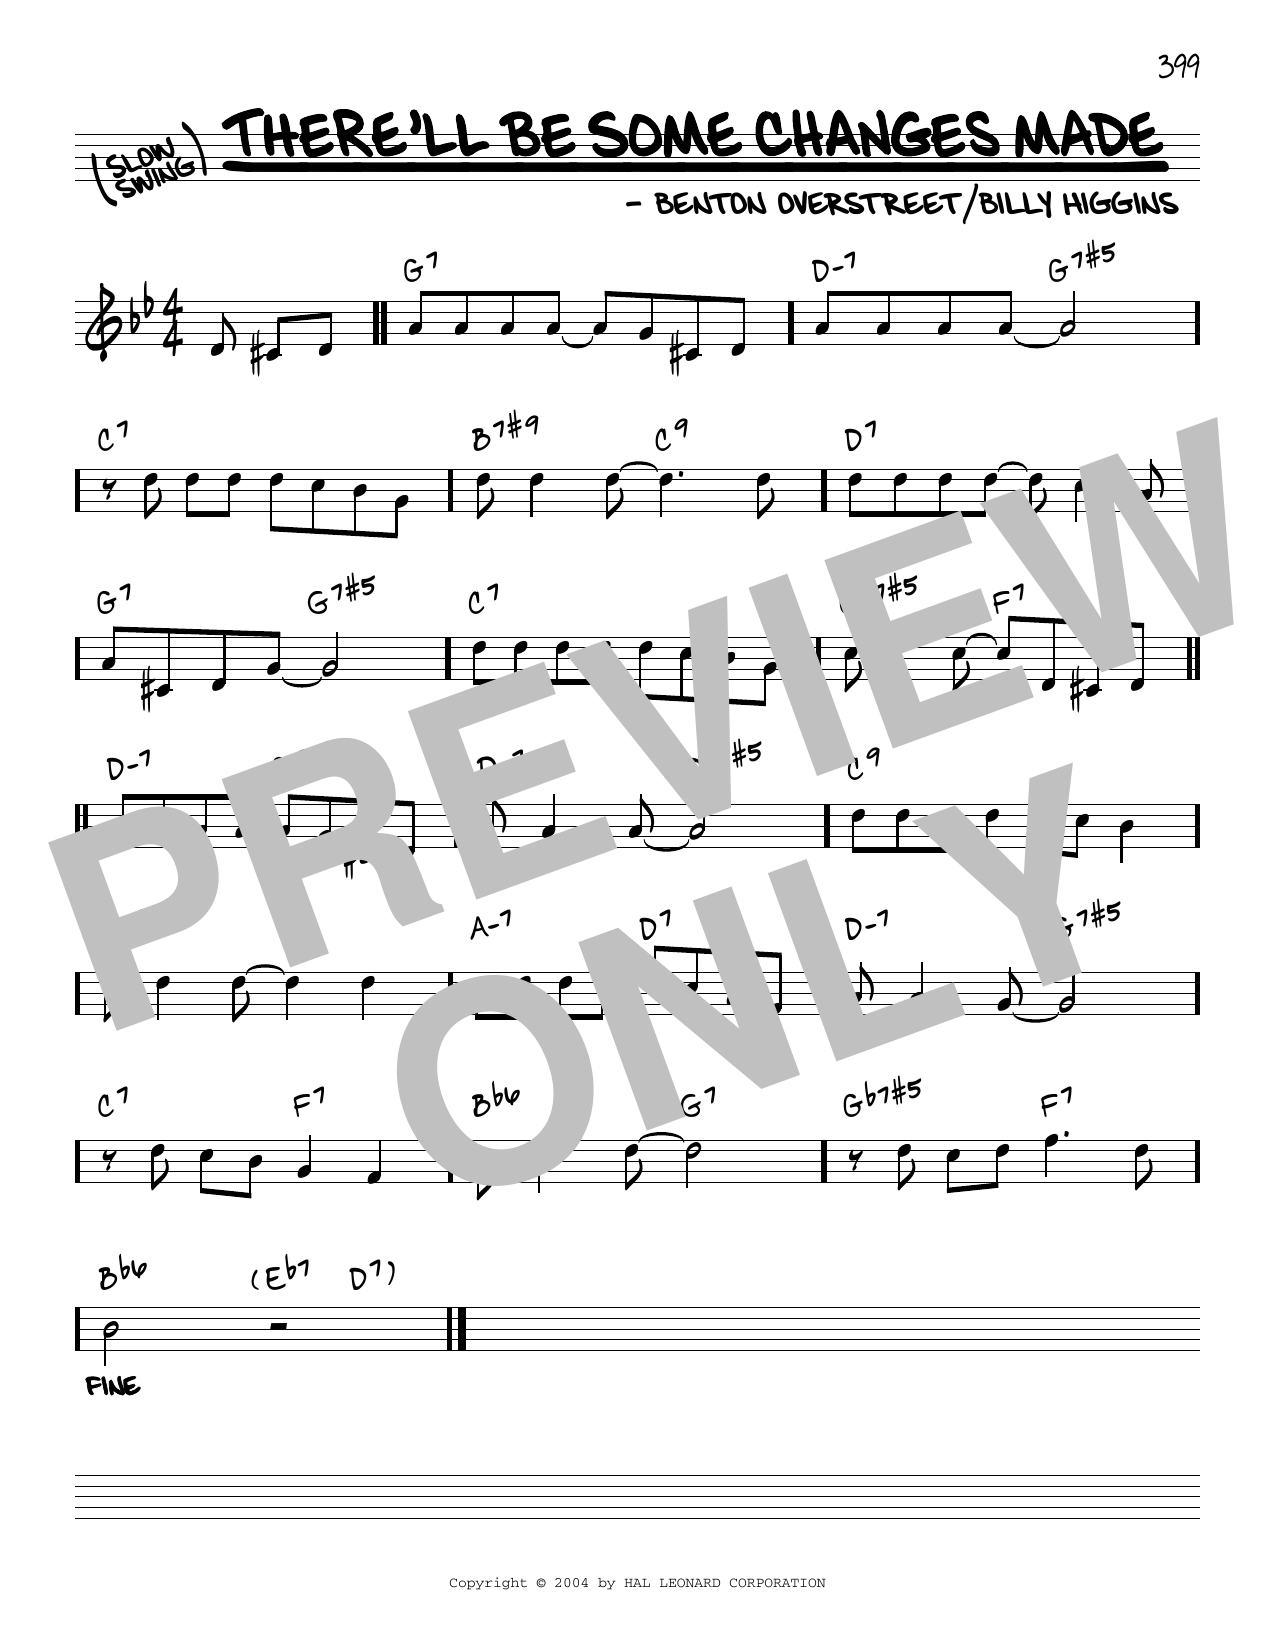 Download W. Benton Overstreet There'll Be Some Changes Made [Reharmon Sheet Music